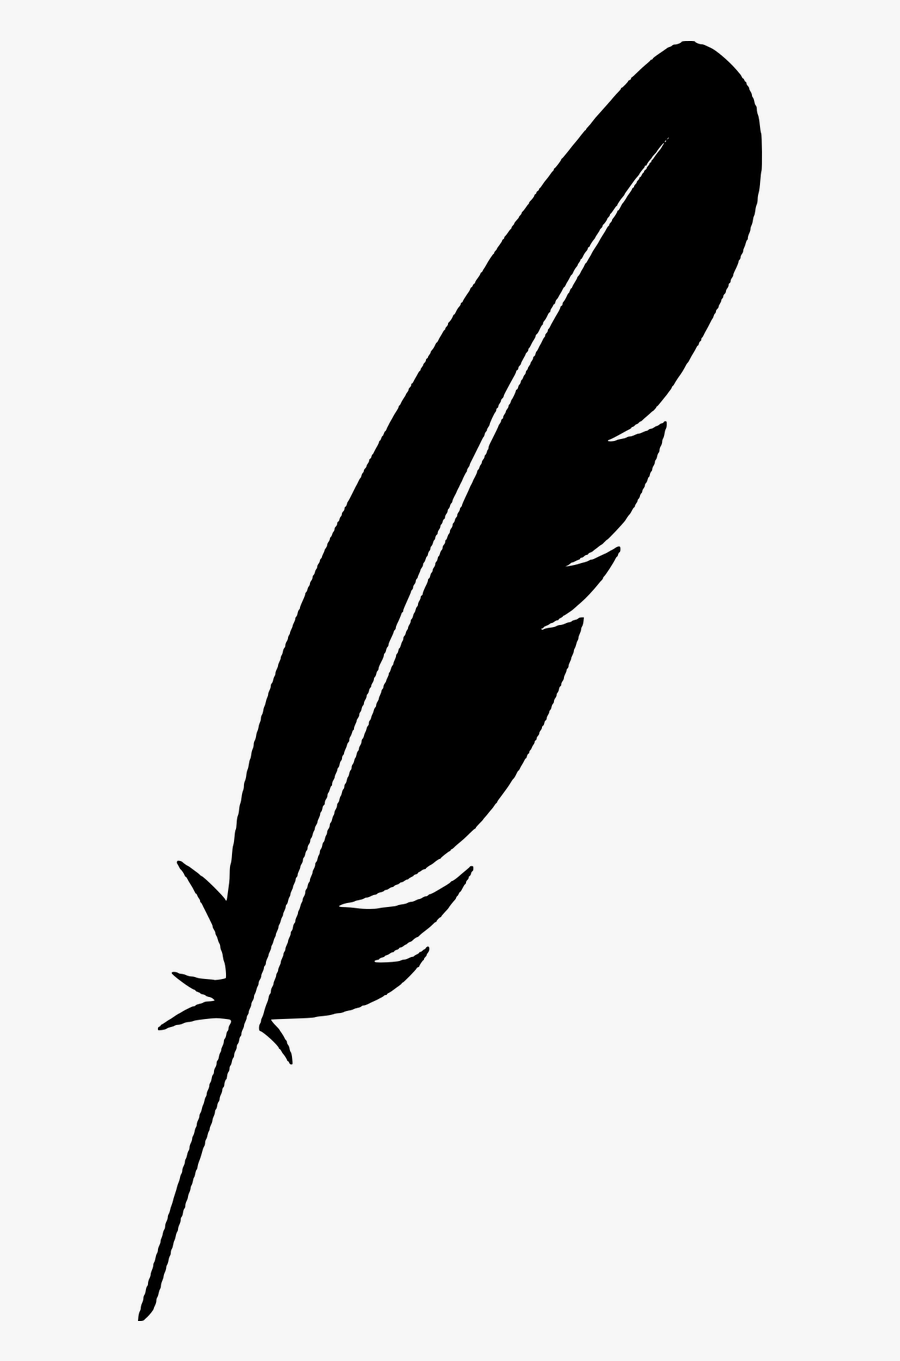 Feather Silhouette Sticker Free Picture - Transparent Background Feather Clipart, Transparent Clipart